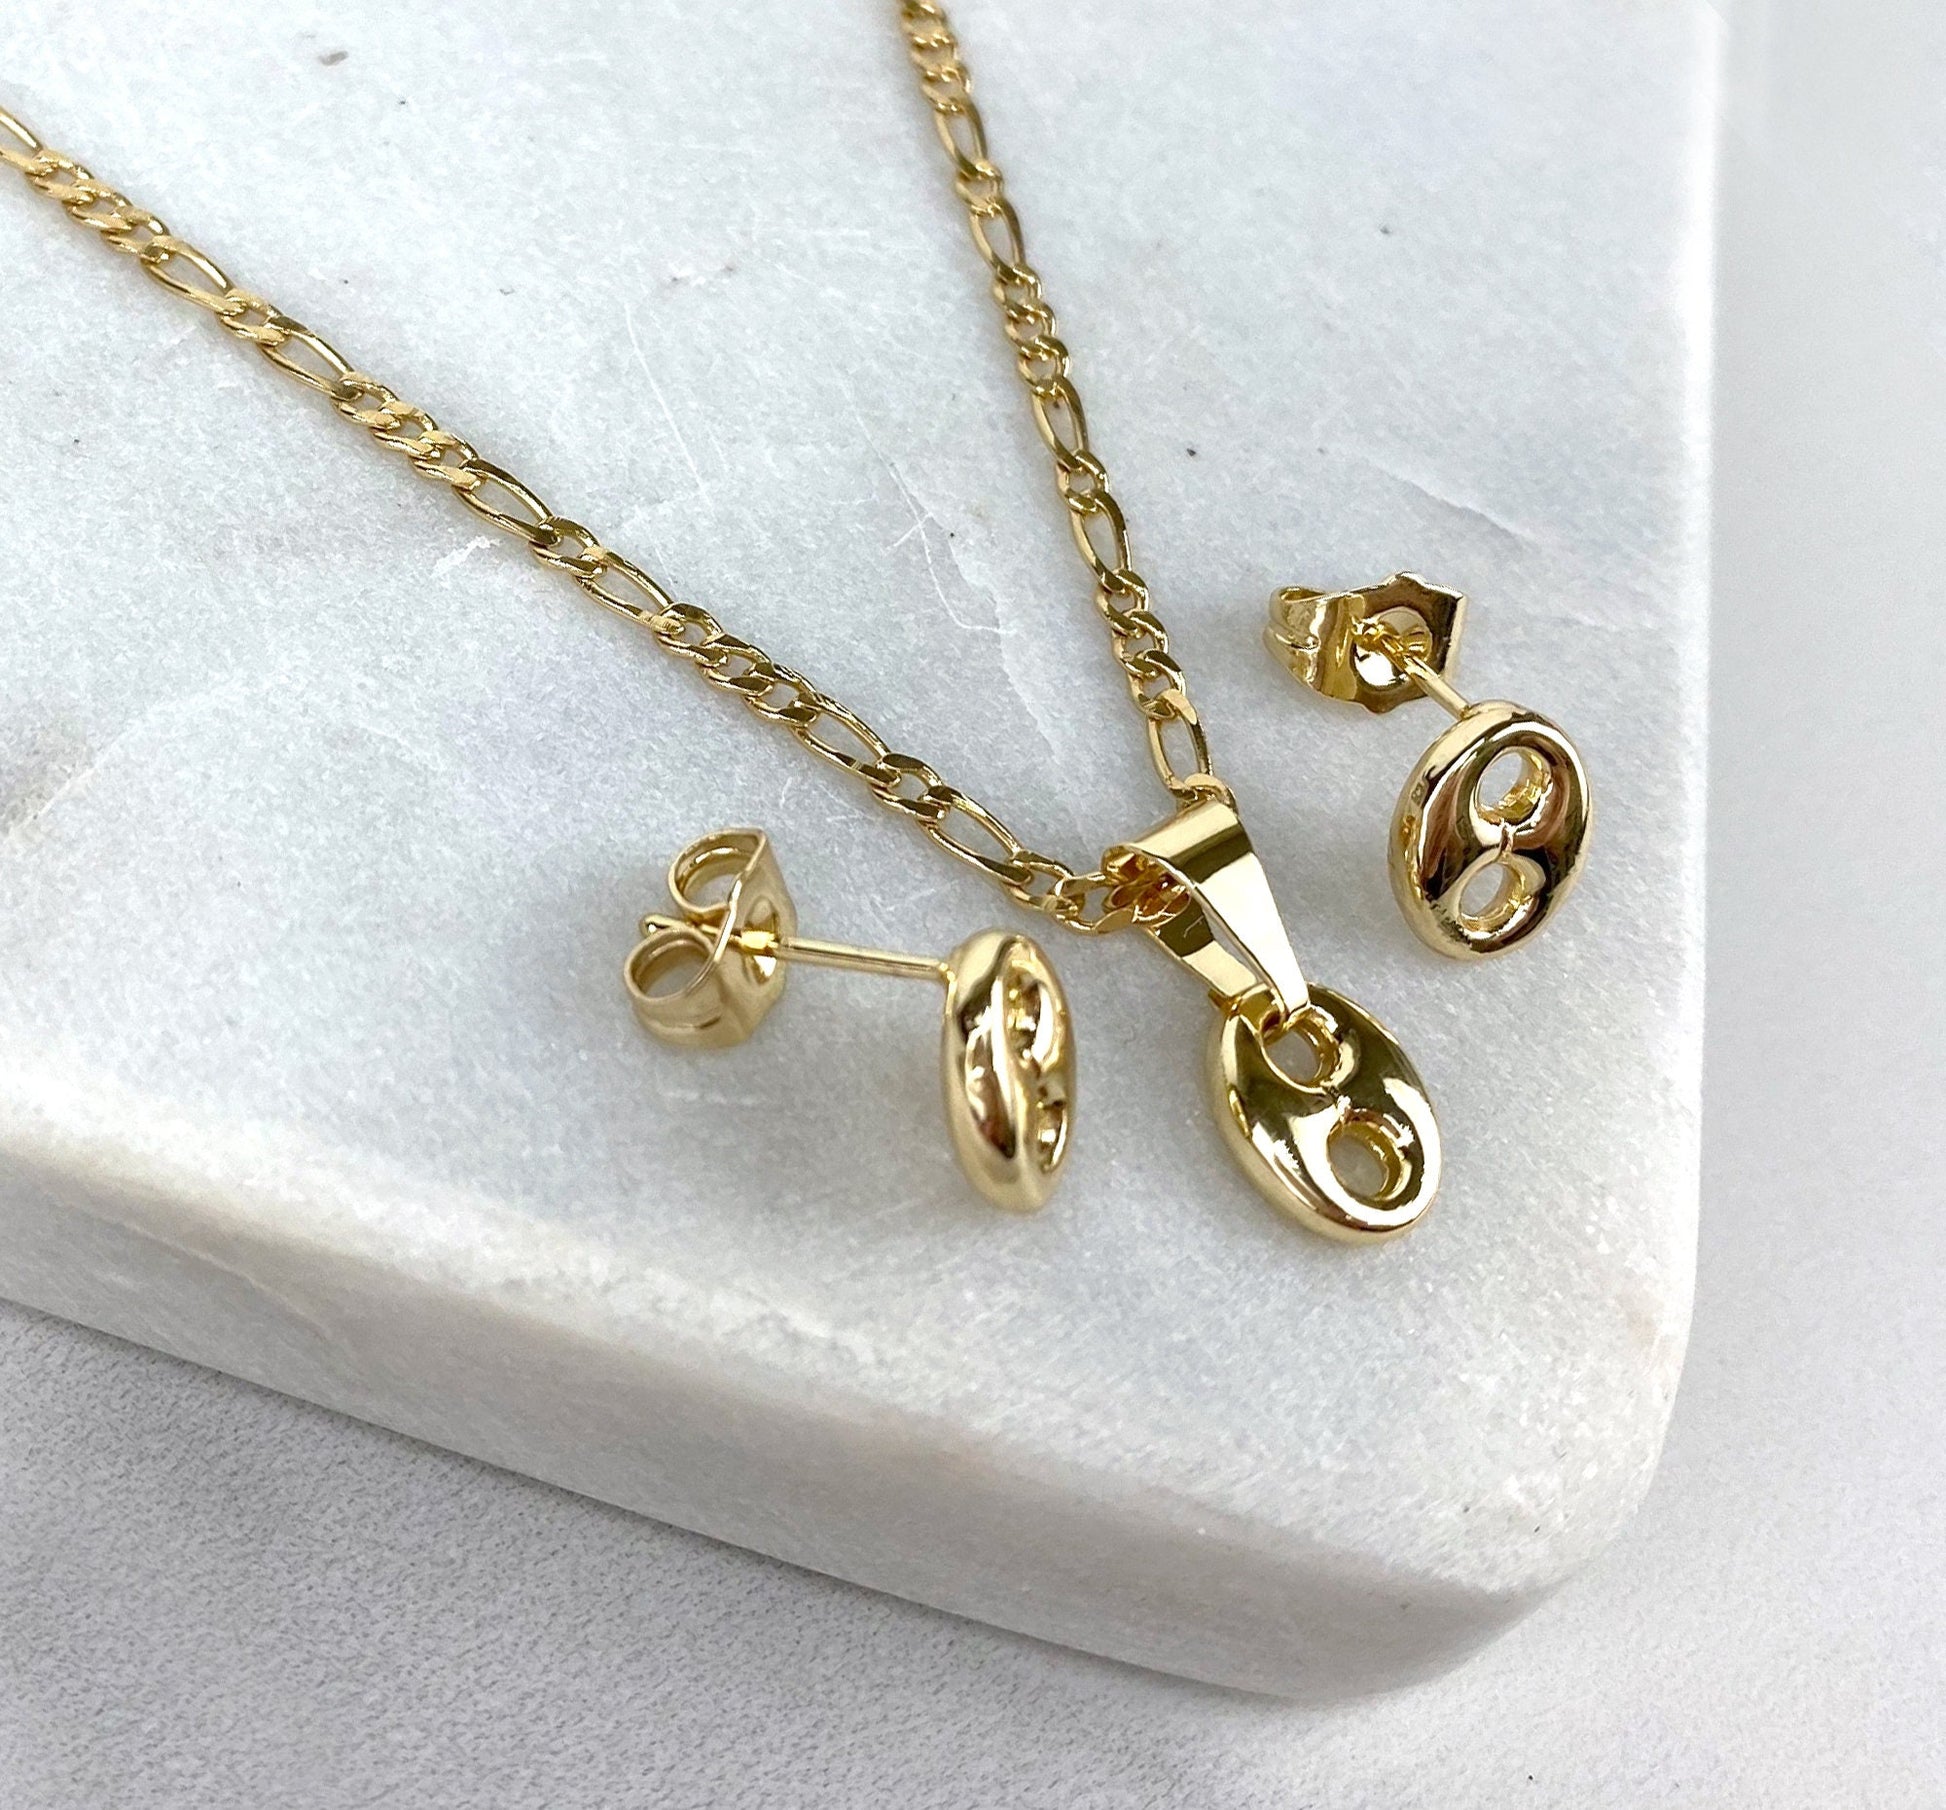 18k Gold Filled Figaro Chain with Small Chunky Link Mariner Pendant & Stud Earrings Set Wholesale Jewelry Supplies